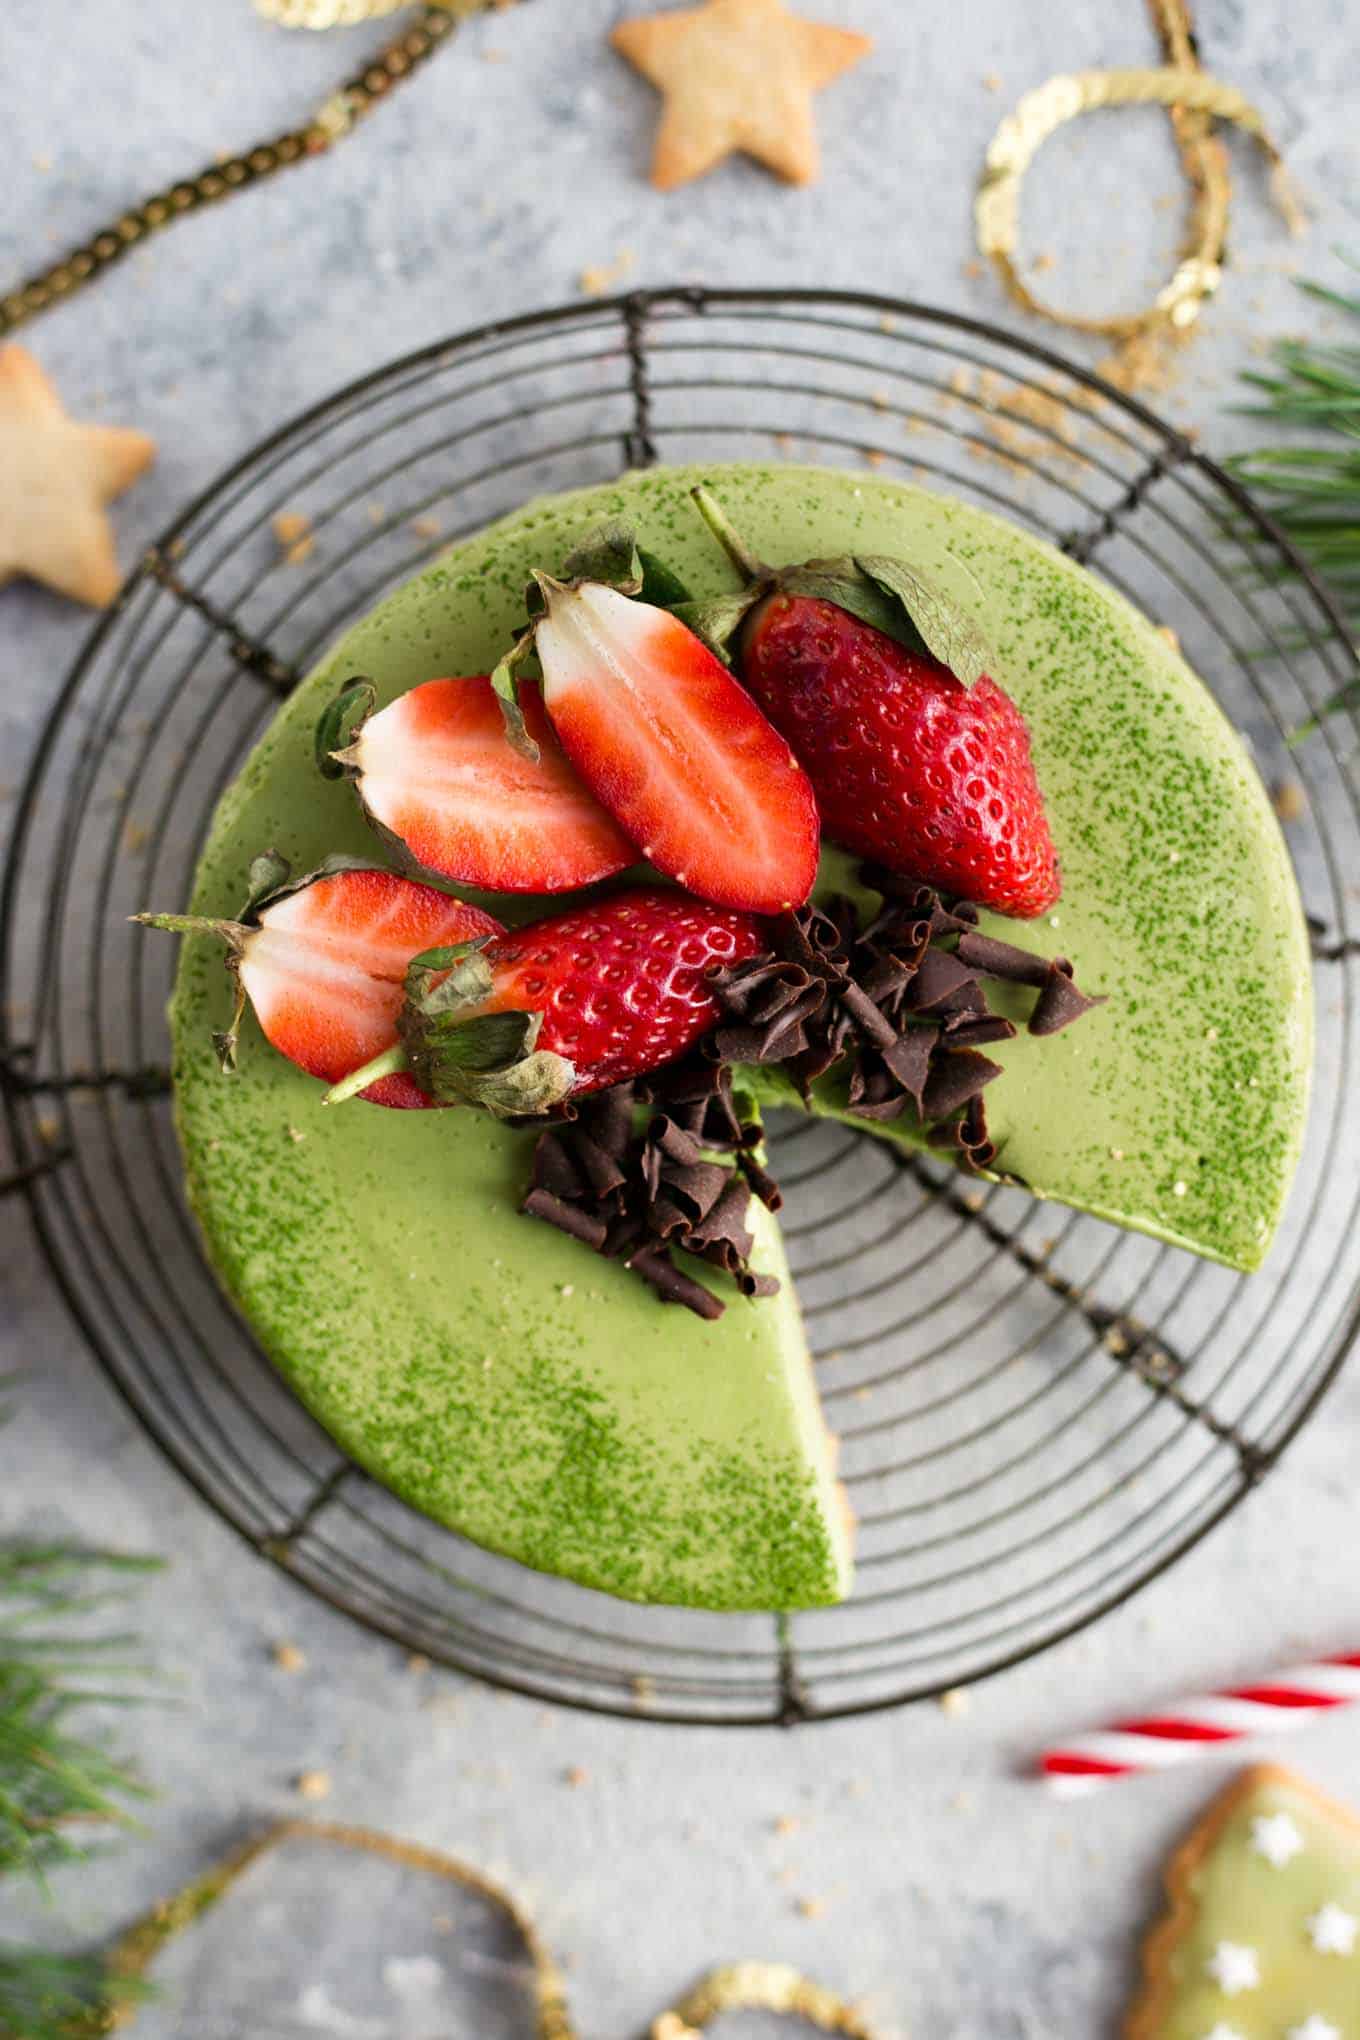 Matcha cheesecake with a festive spin! Super creamy and smooth cheesecake with ginger flavoured base! #vegan #dairyfree #cheesecake #matcha | via @annabanana.co